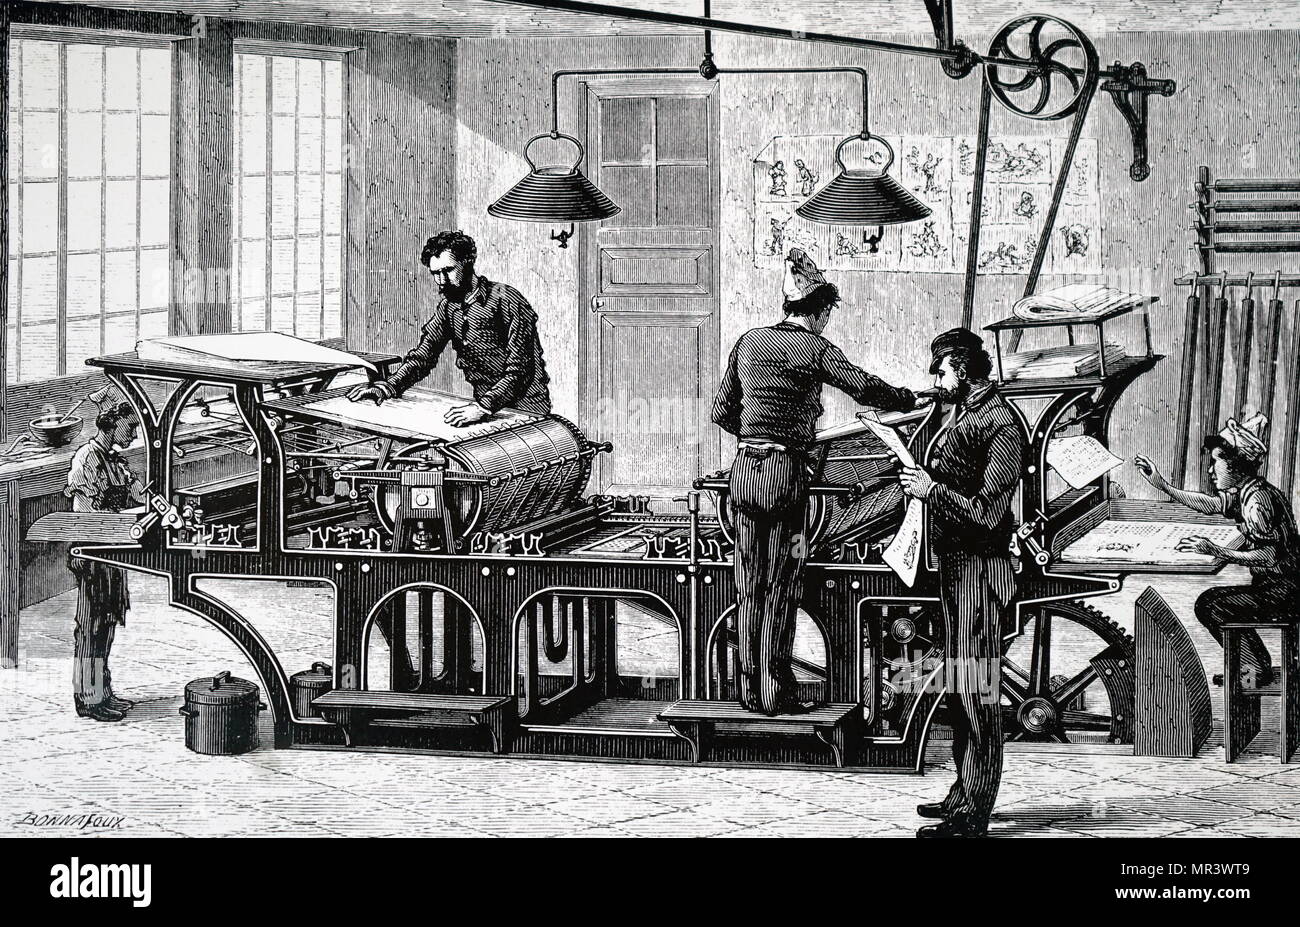 Engraving depicting a printing press powered by a steam engine. Power was brought to the machine by an overhead shaft and a belt drive. Dated 19th century Stock Photo